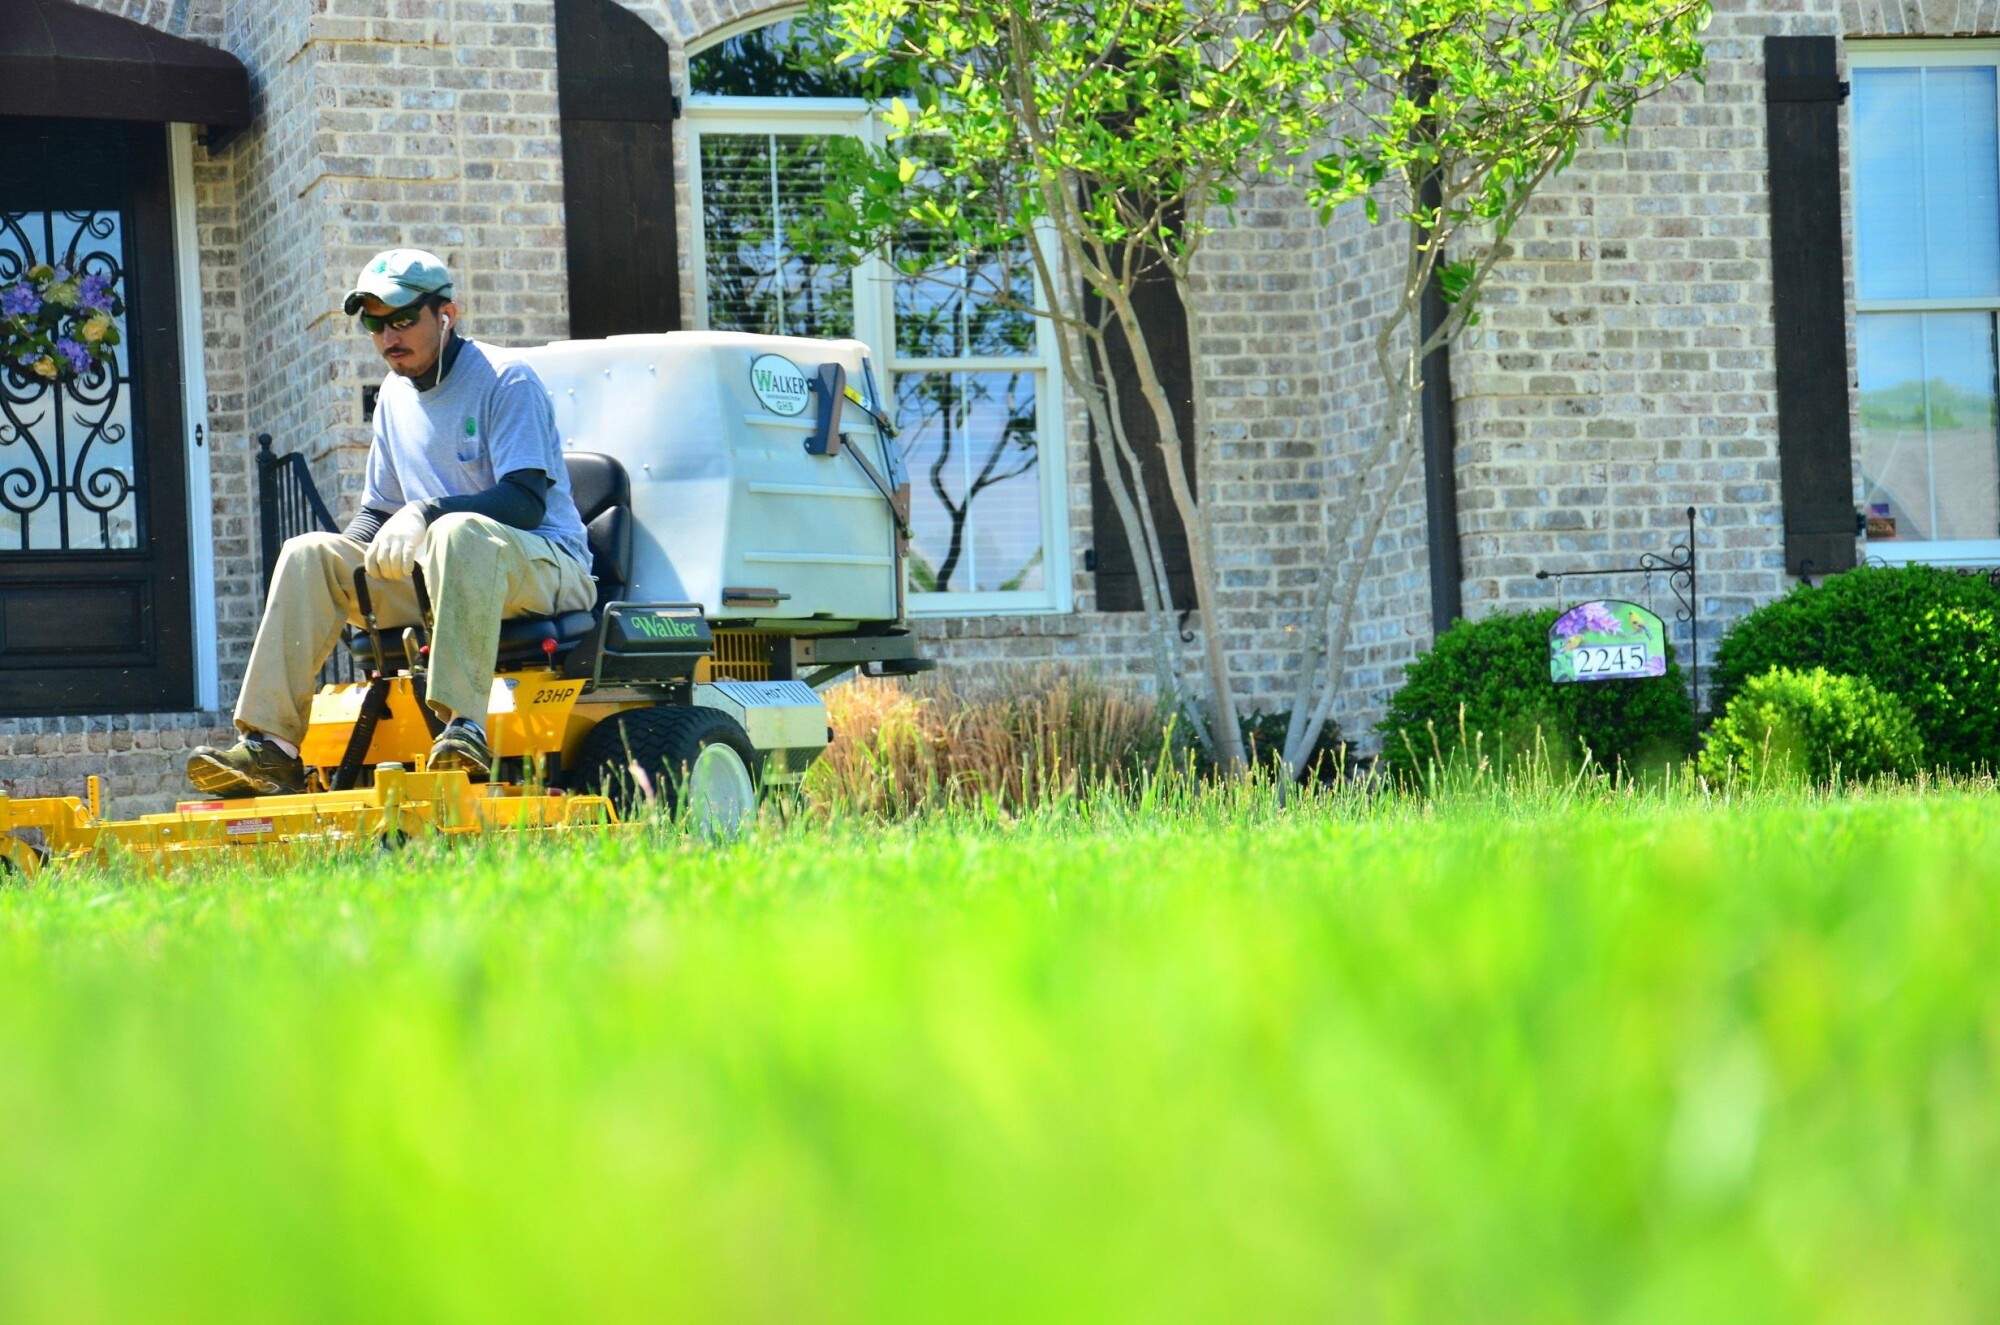 Finding the right expert to care for your lawn requires knowing your options. Here is the complete guide for homeowners on how to hire a lawn care company.